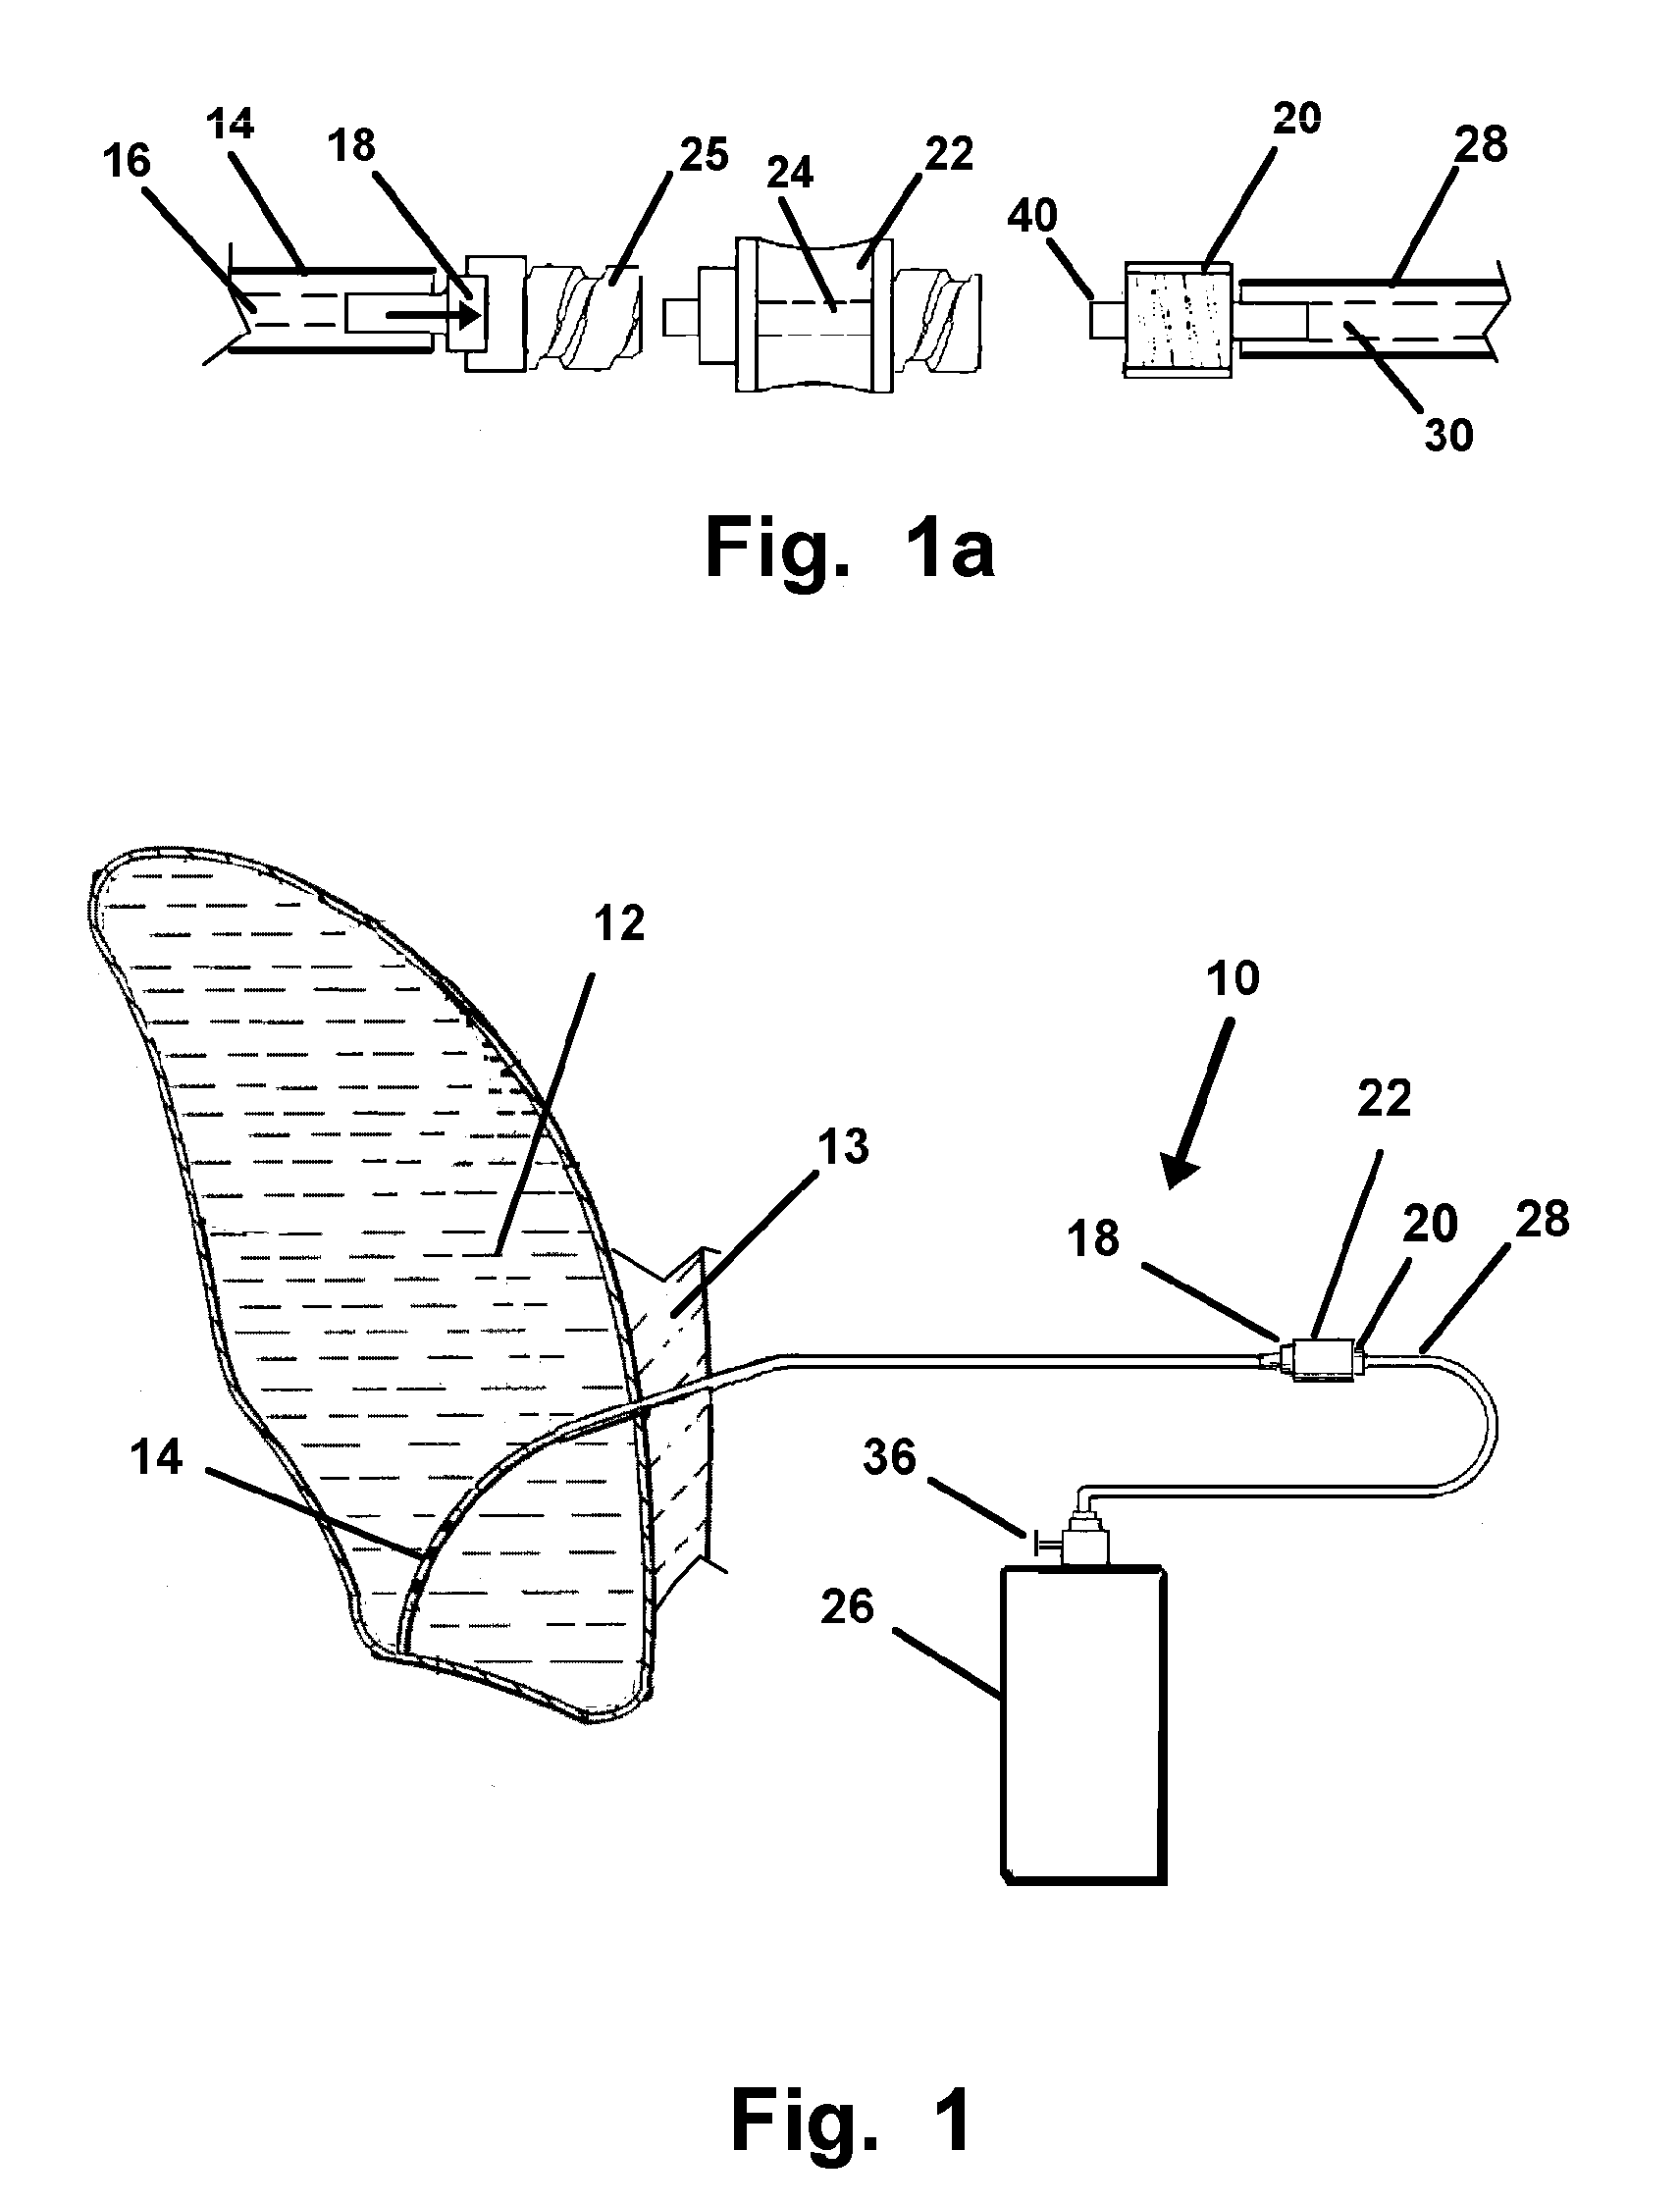 Method and Apparatus for Treatment of Pleural Effusion